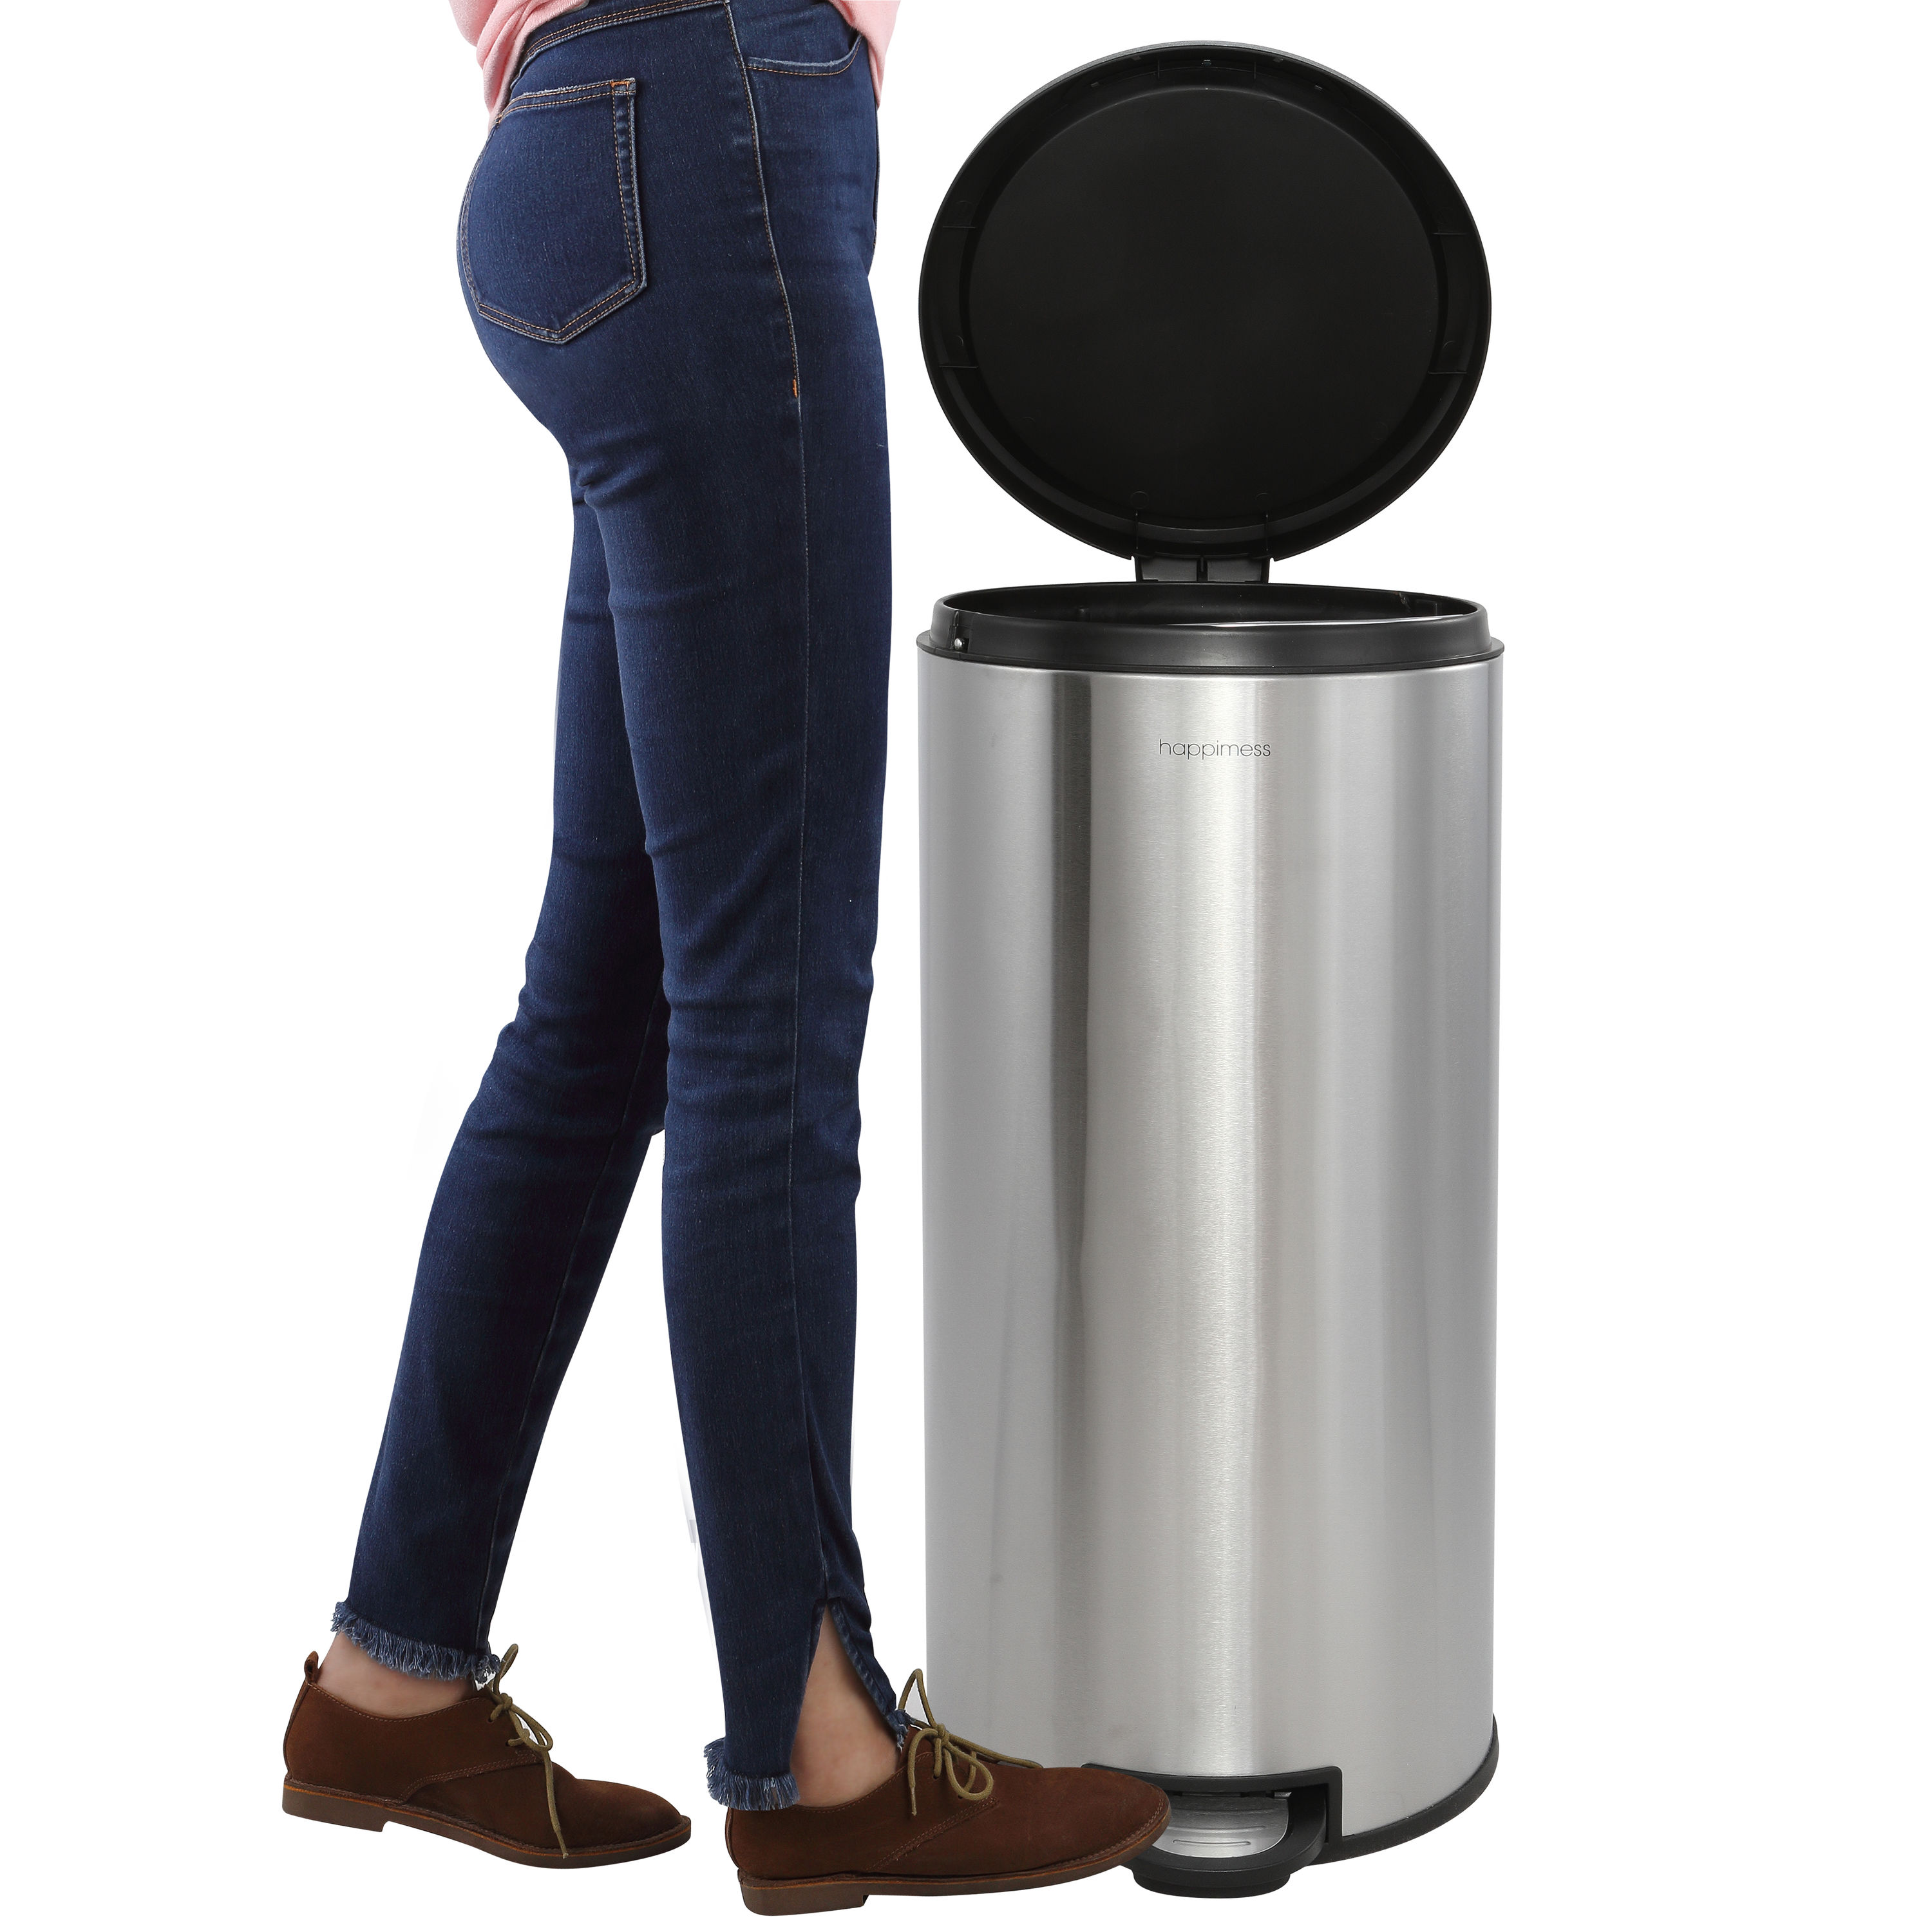 Mainstays 7.9 Gallon Trash Can. Plastic Round Step Kitchen Trash Can, Silver